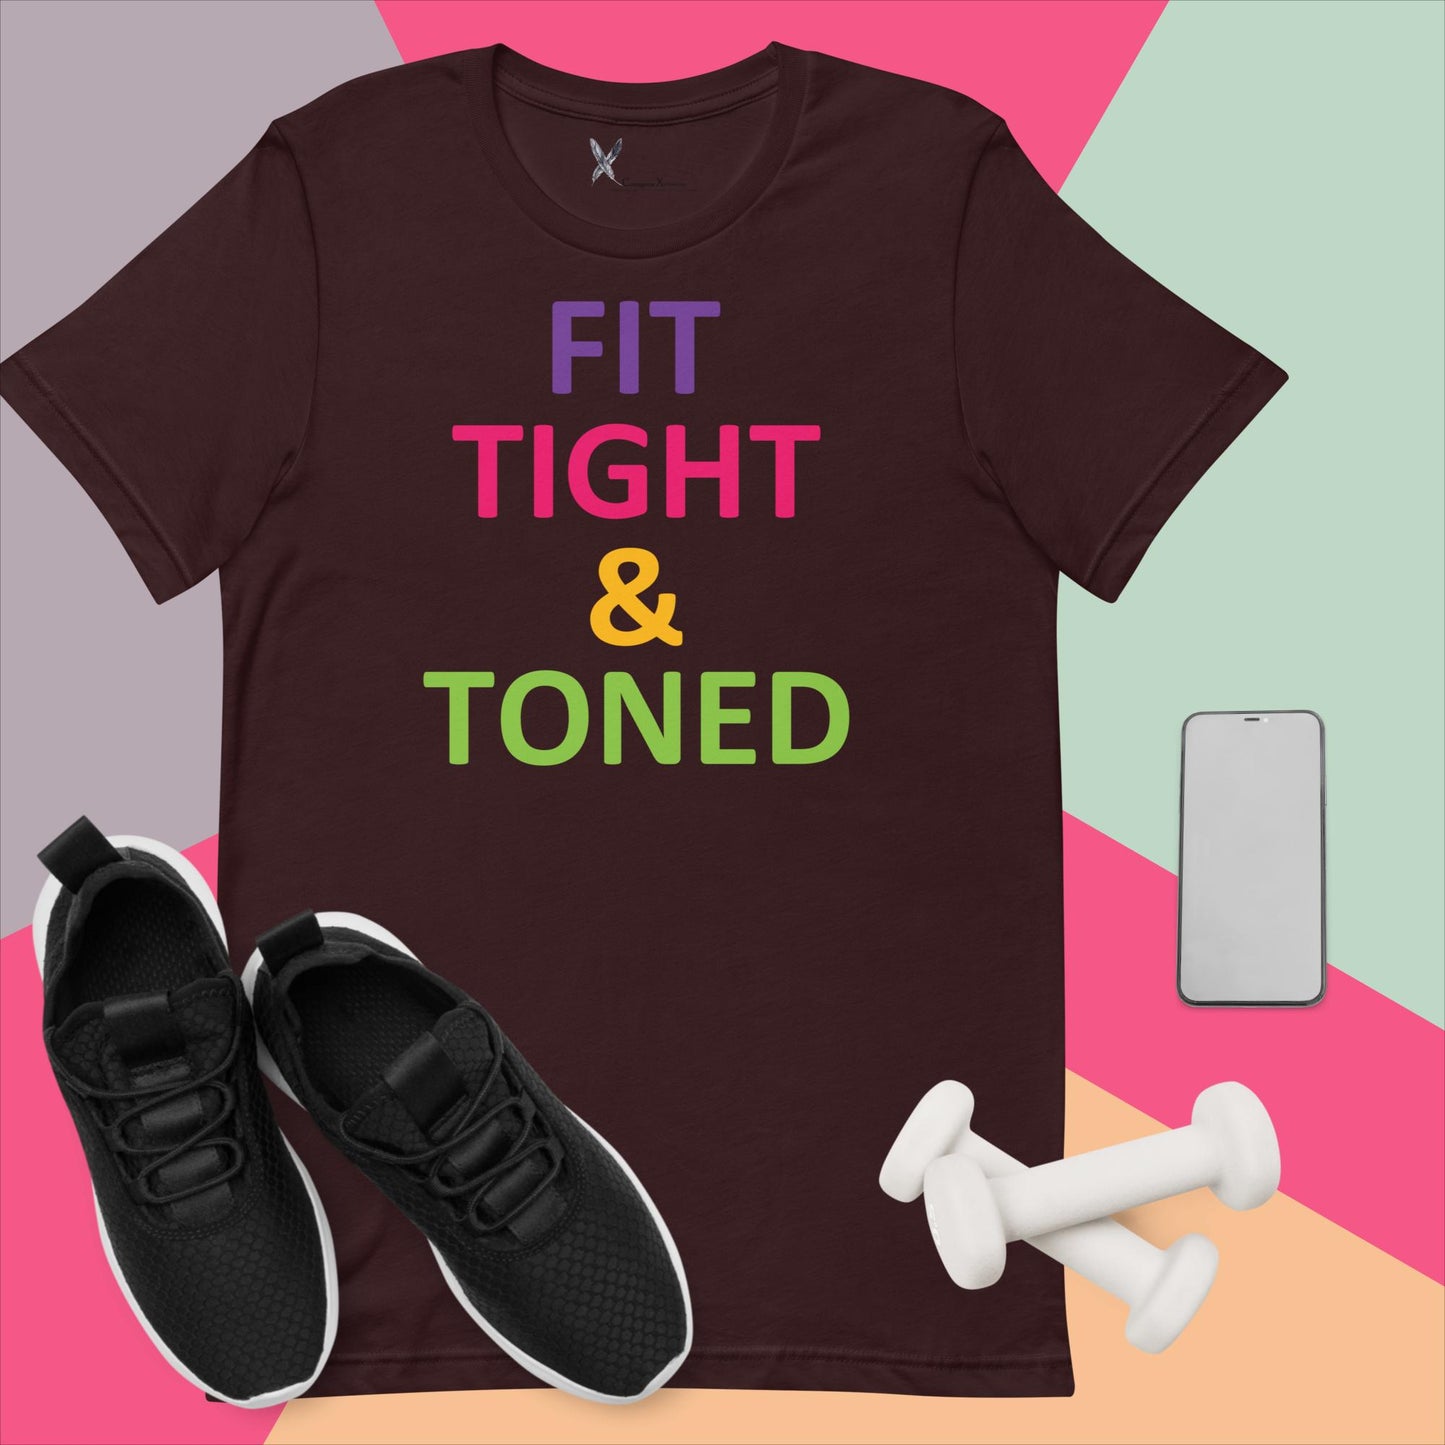 Fit Tight & Toned Women's Fitness T-Shirt